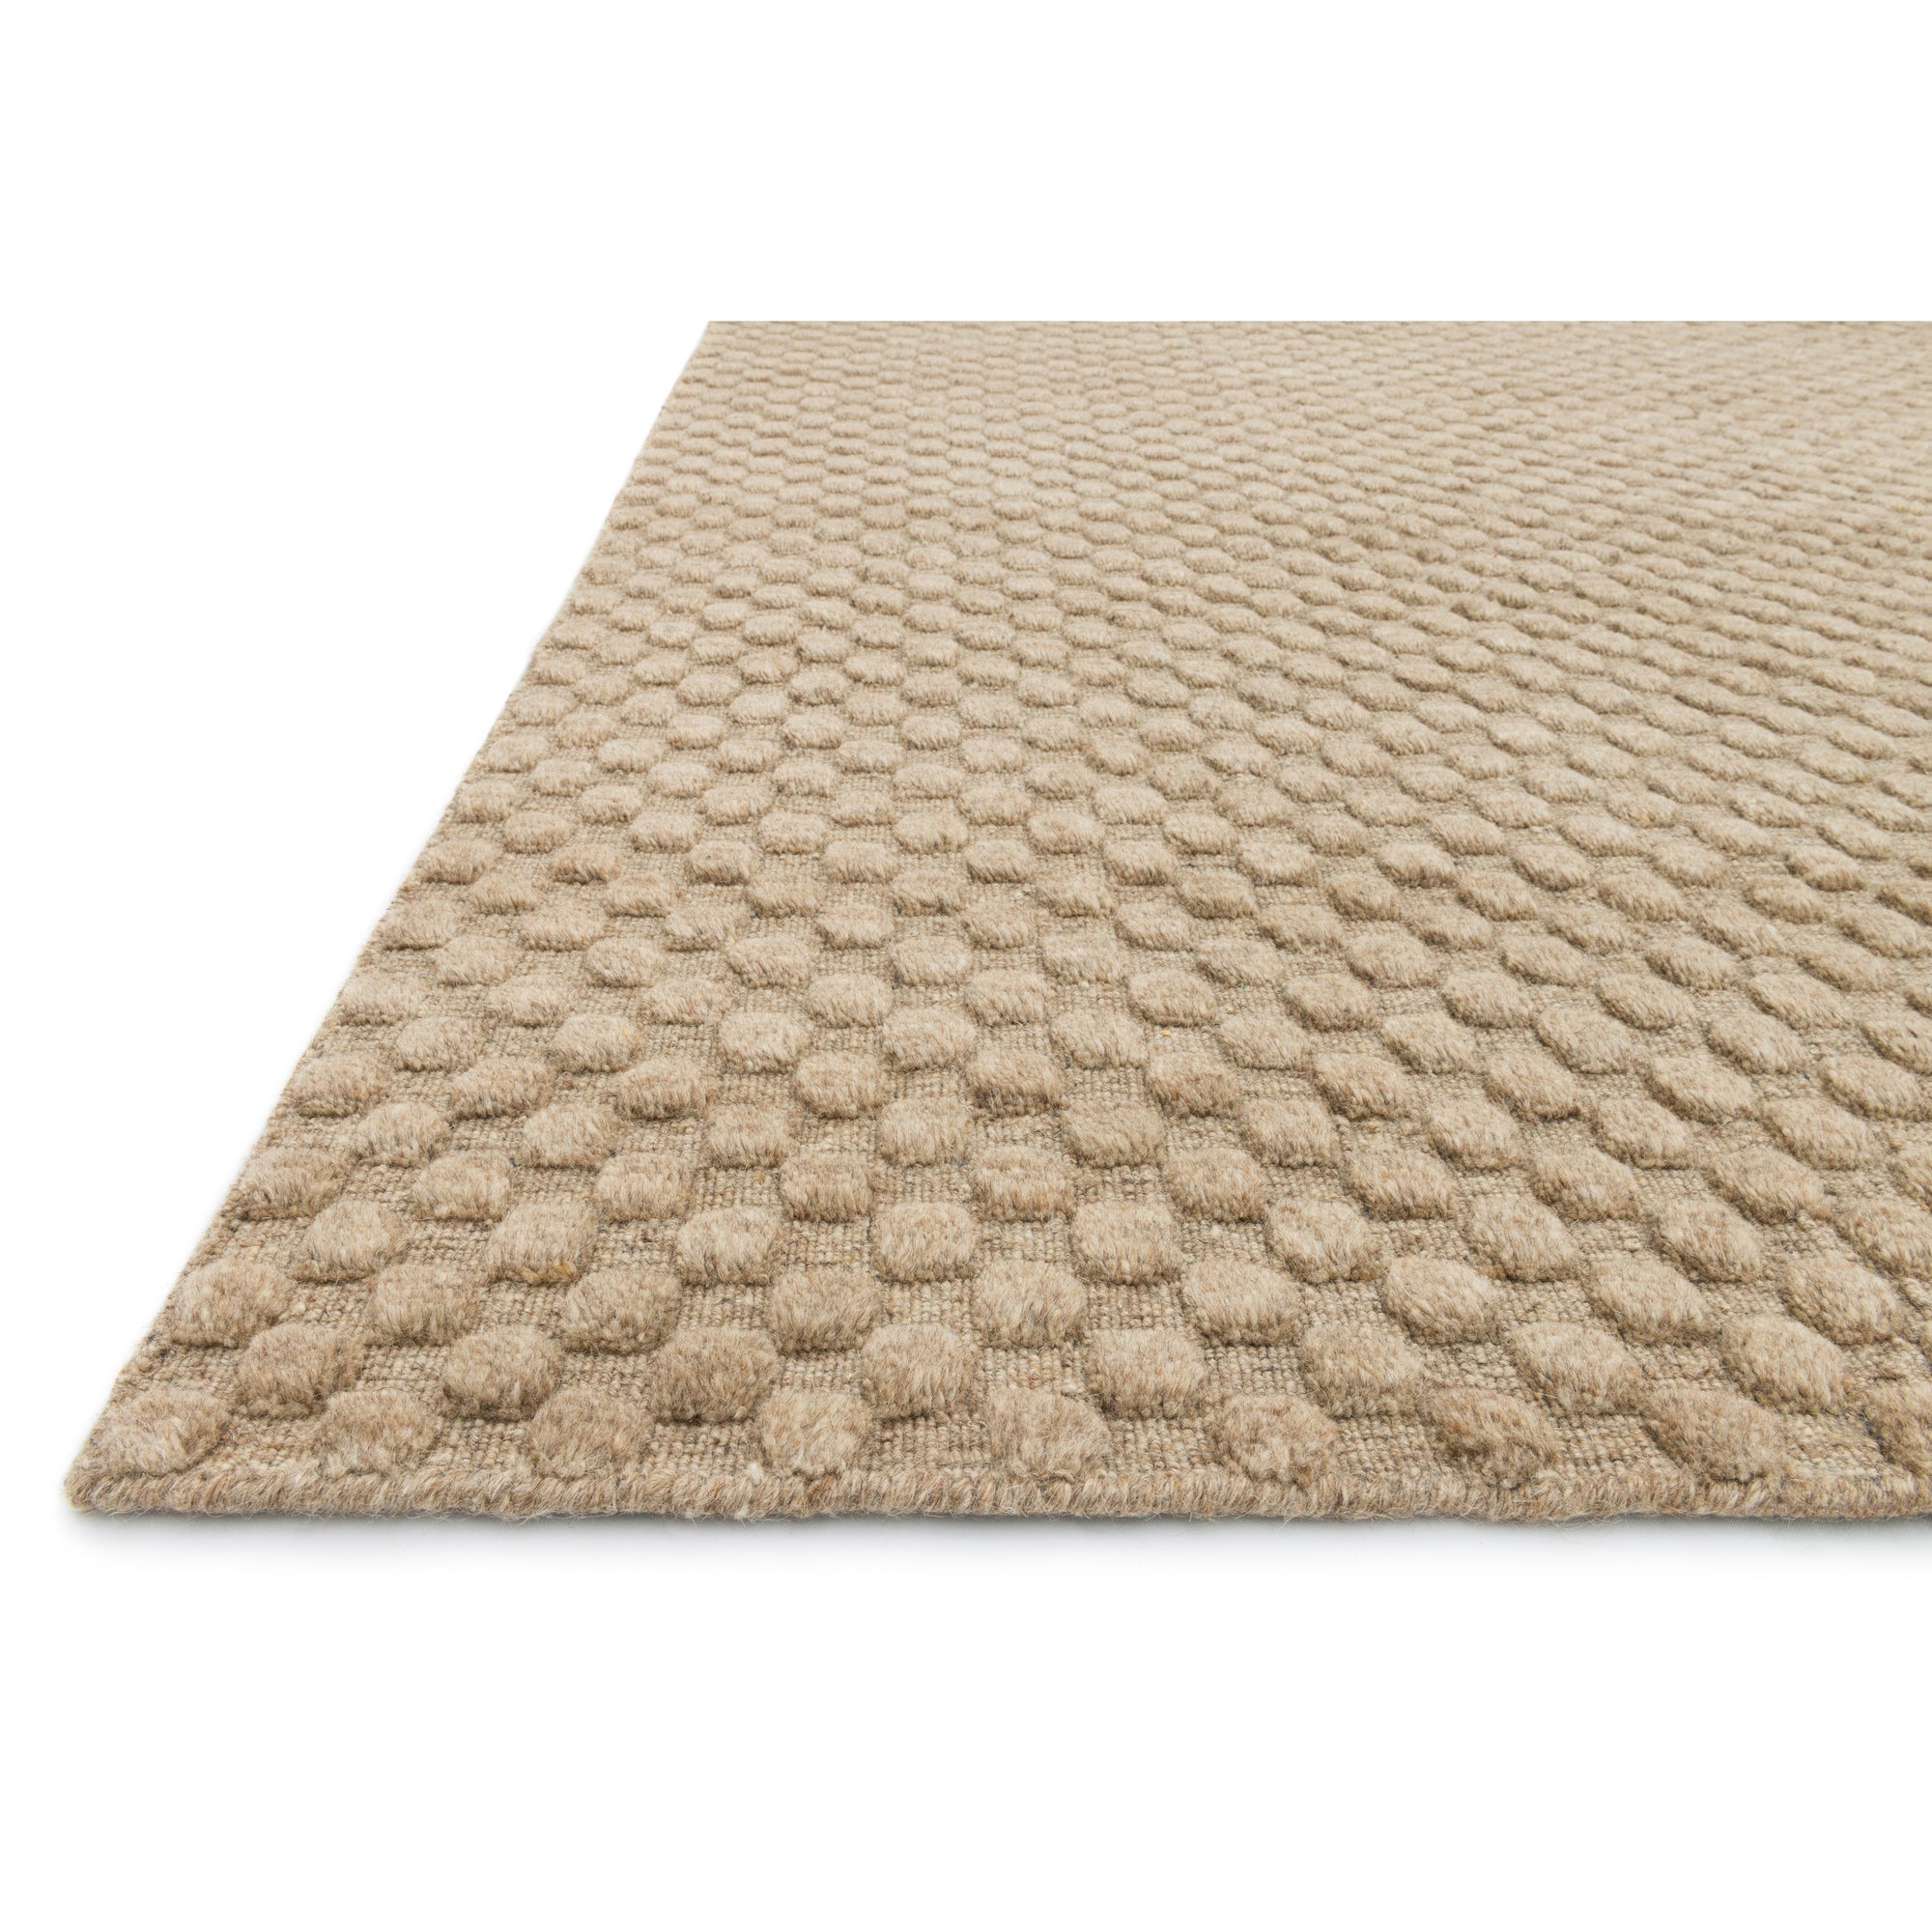 Rugs by Roo Loloi Hadley Dune Area Rug in size 3' 6" x 5' 6"